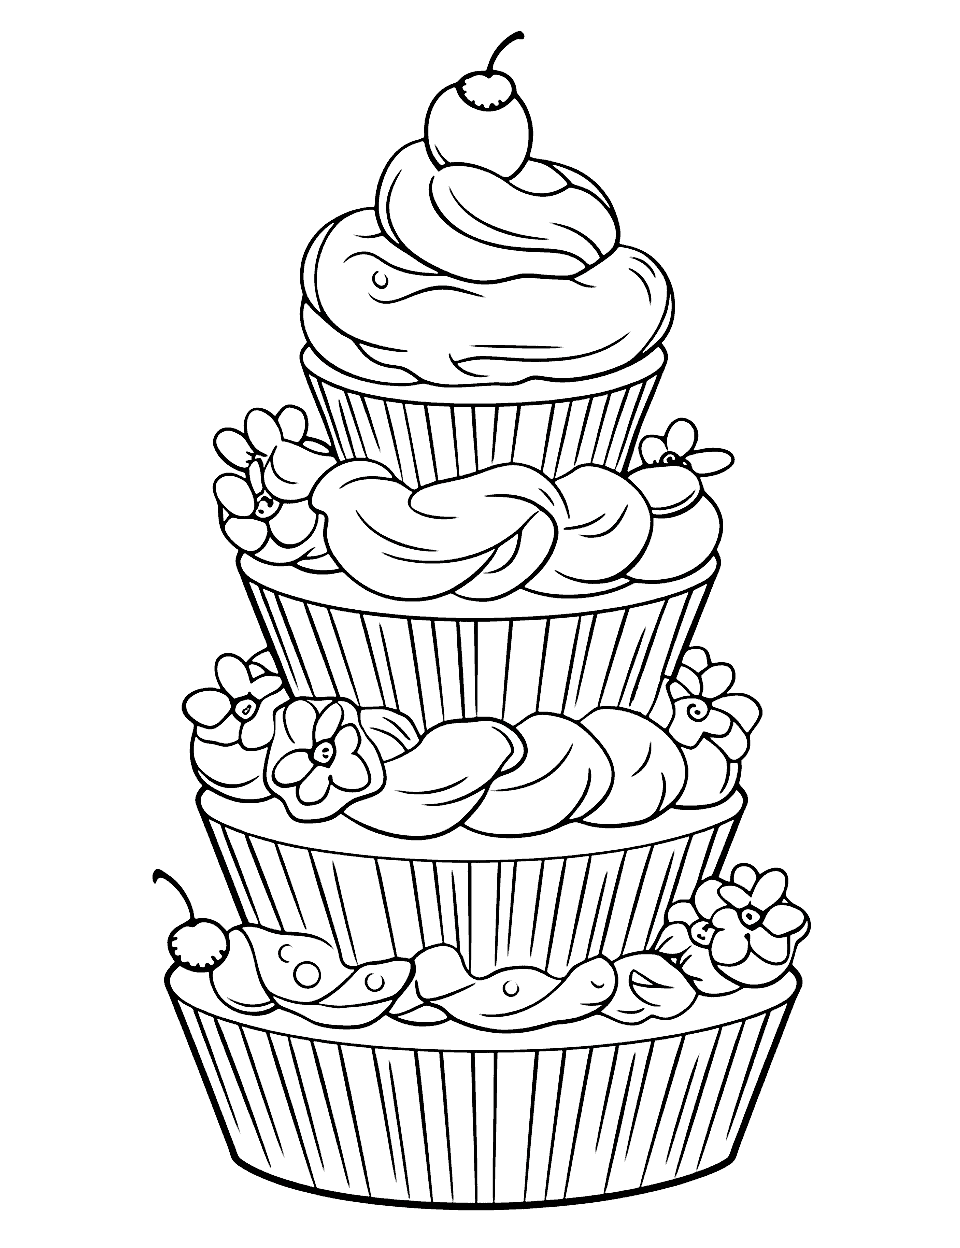 Fancy Cupcake Tower Coloring Page - A tall tower of elaborately decorated cupcakes.